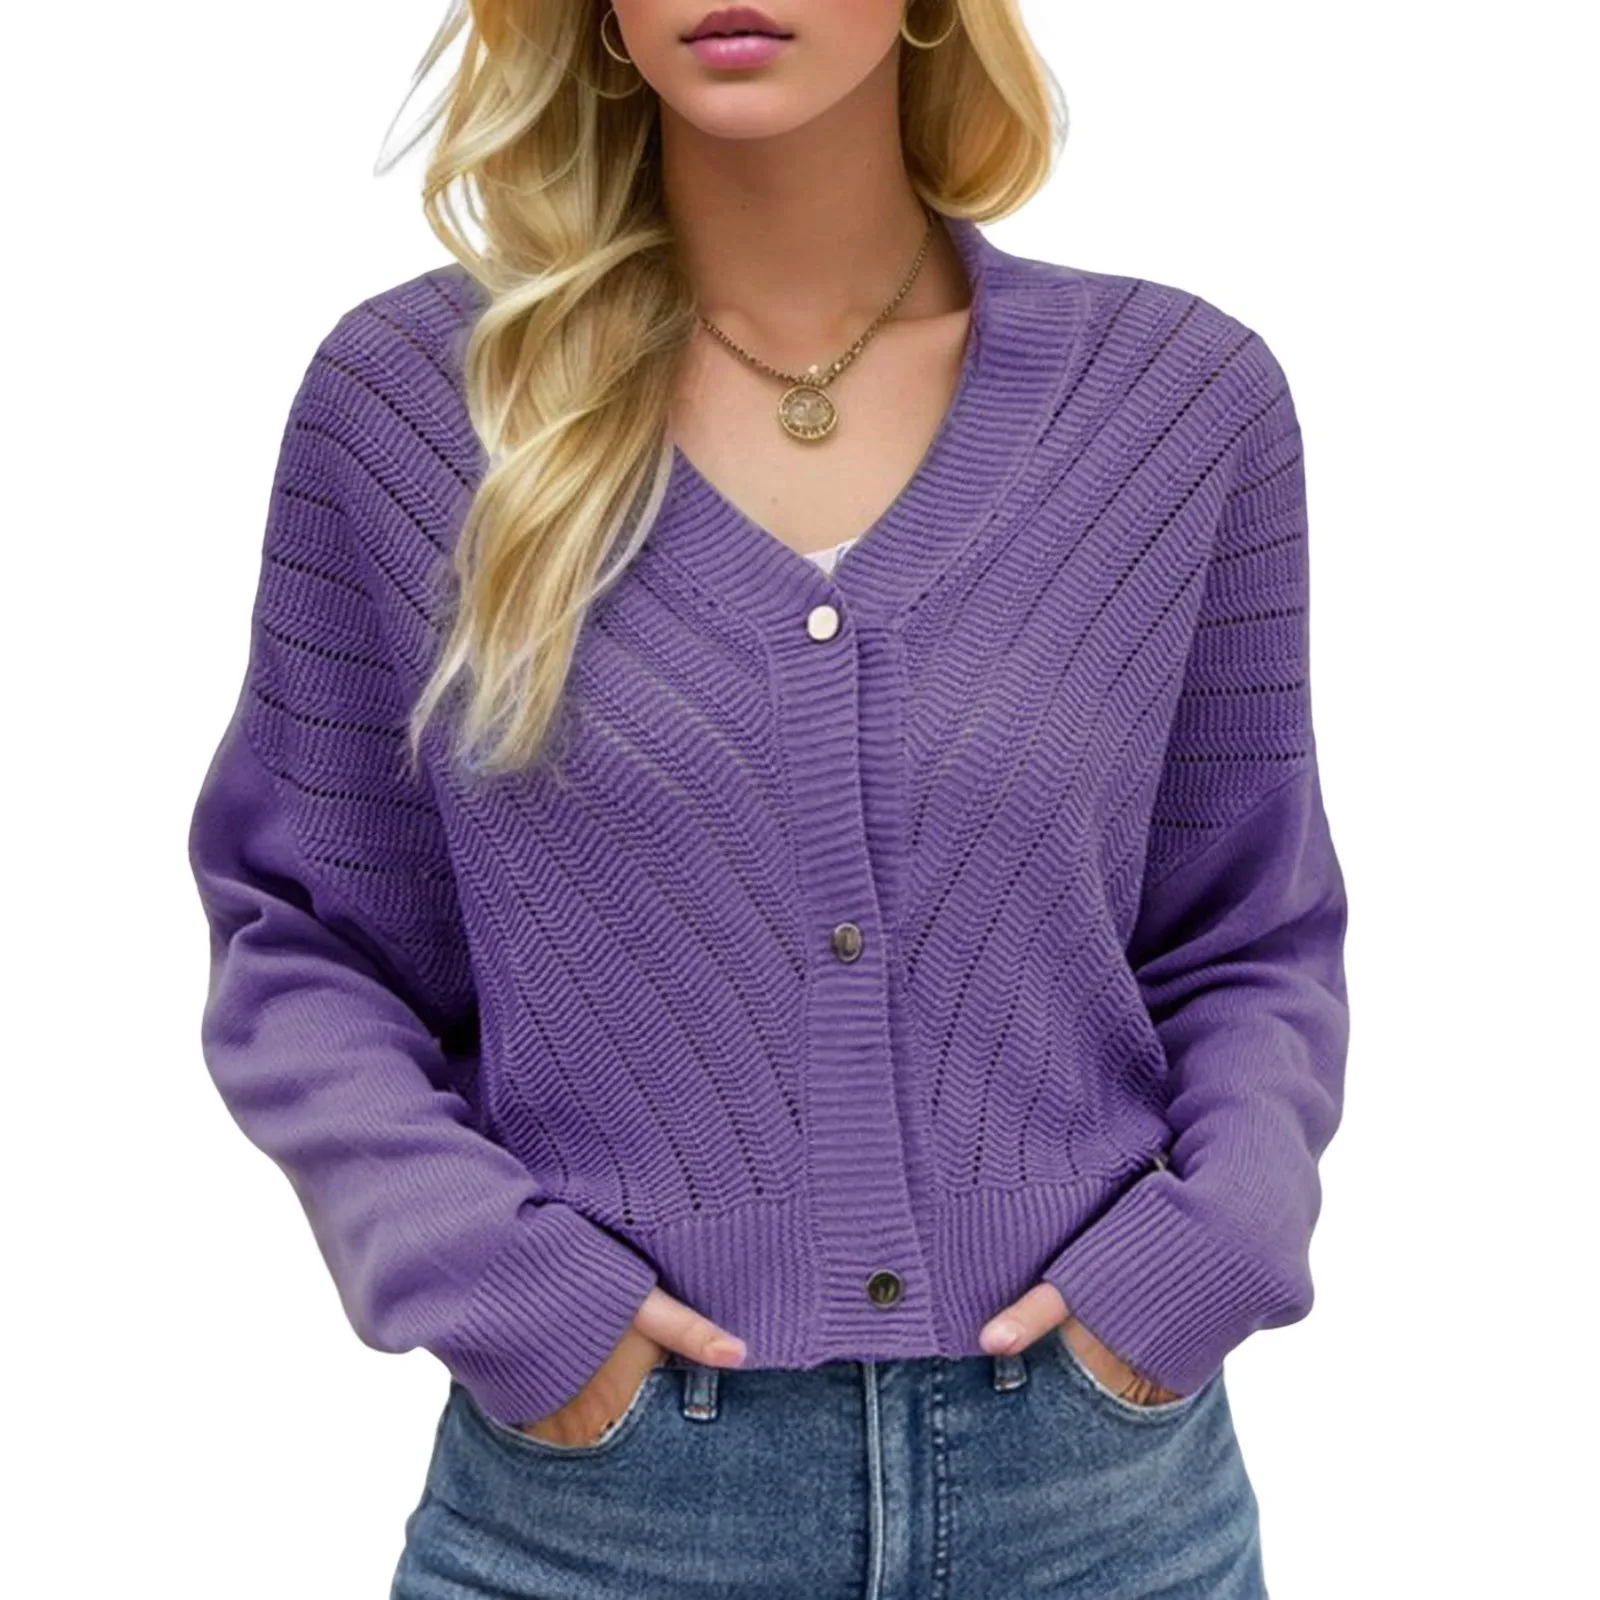 

Women Long Sleeve Crochet Cropped Cardigans Sweater Tops Knitted Cardigans for Women